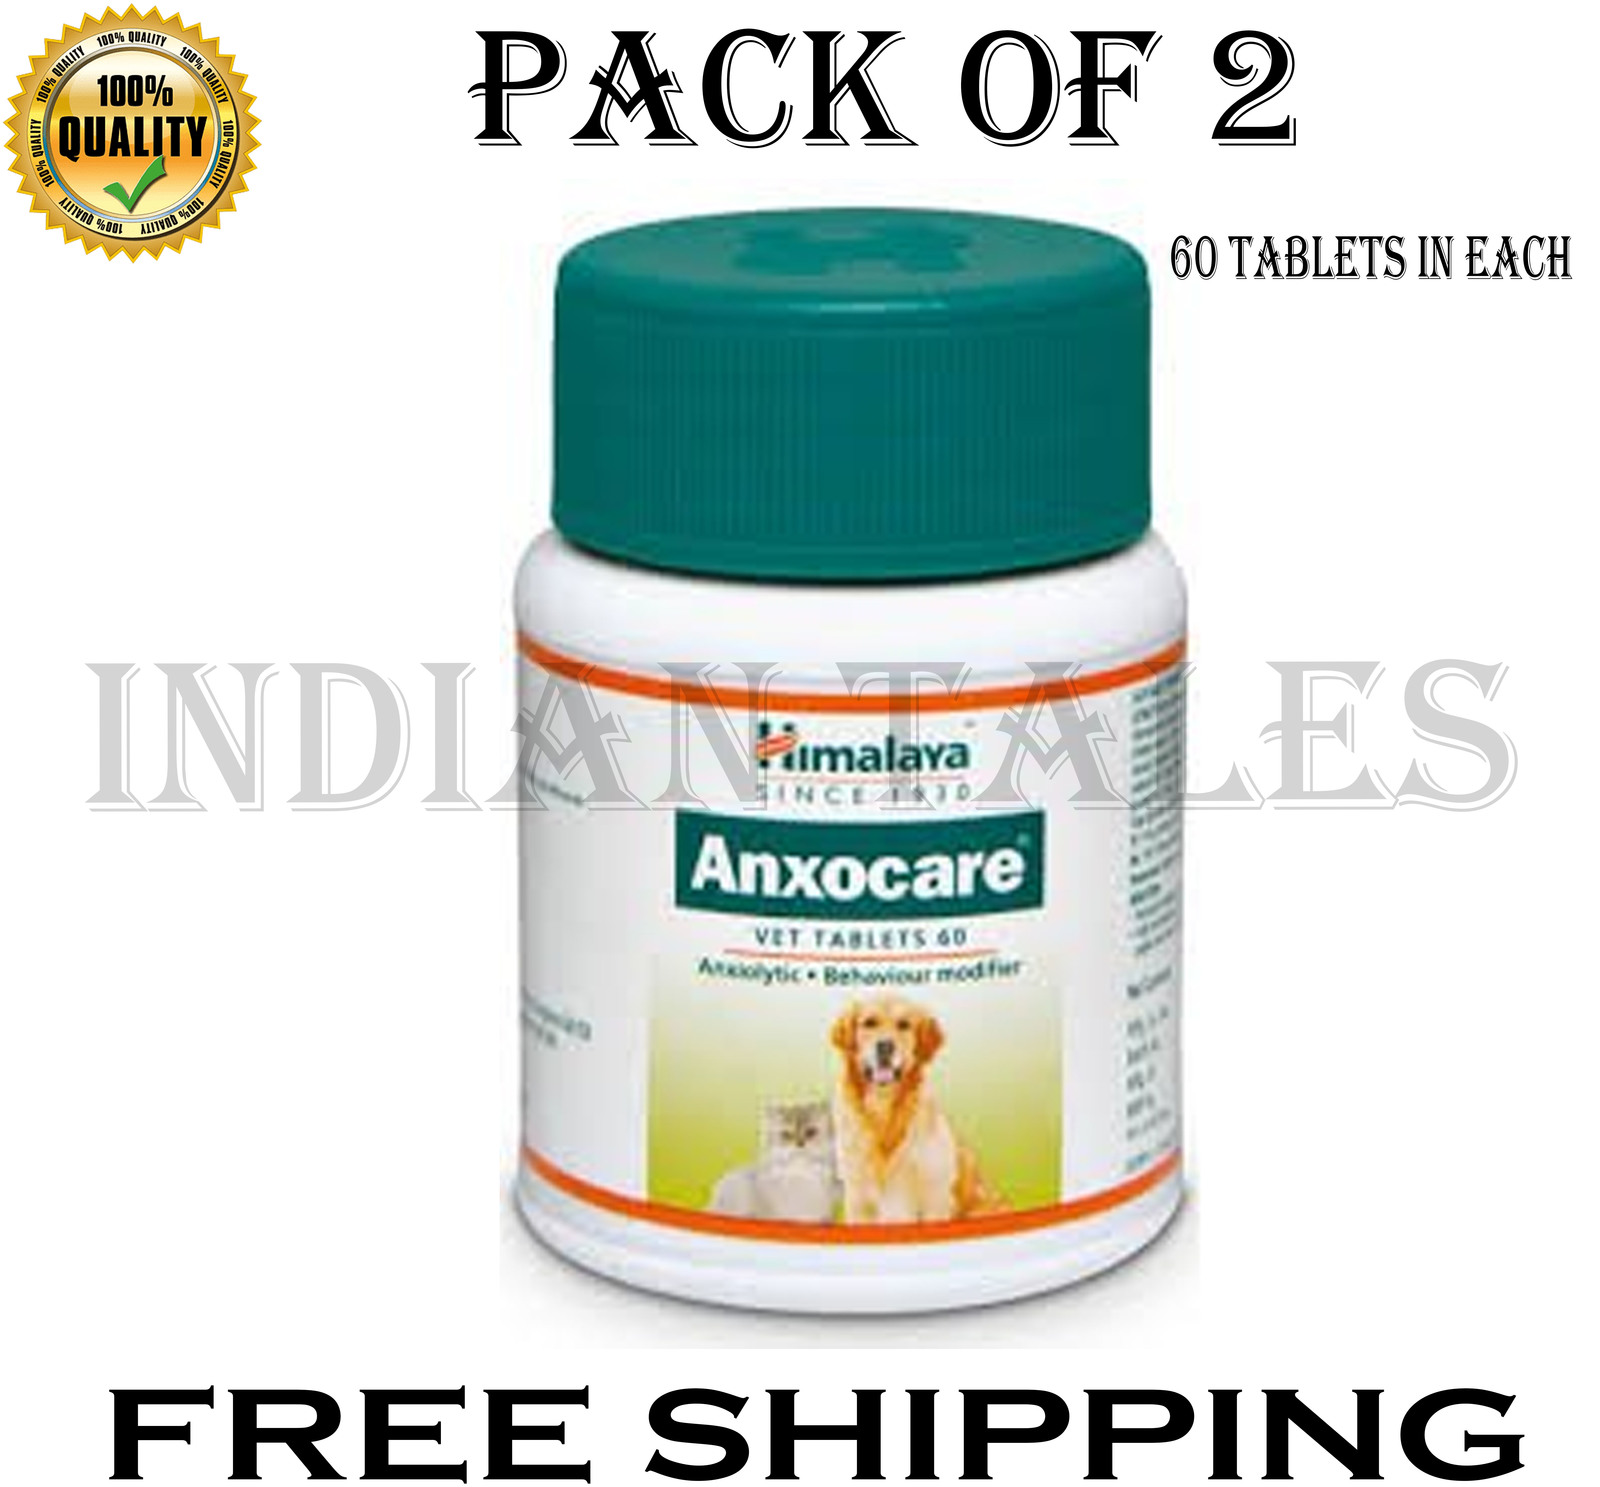 Himalaya Anxocare Vet Tablet (60 Tablets) Dogs for better receptivity Pack of 2 - $30.99